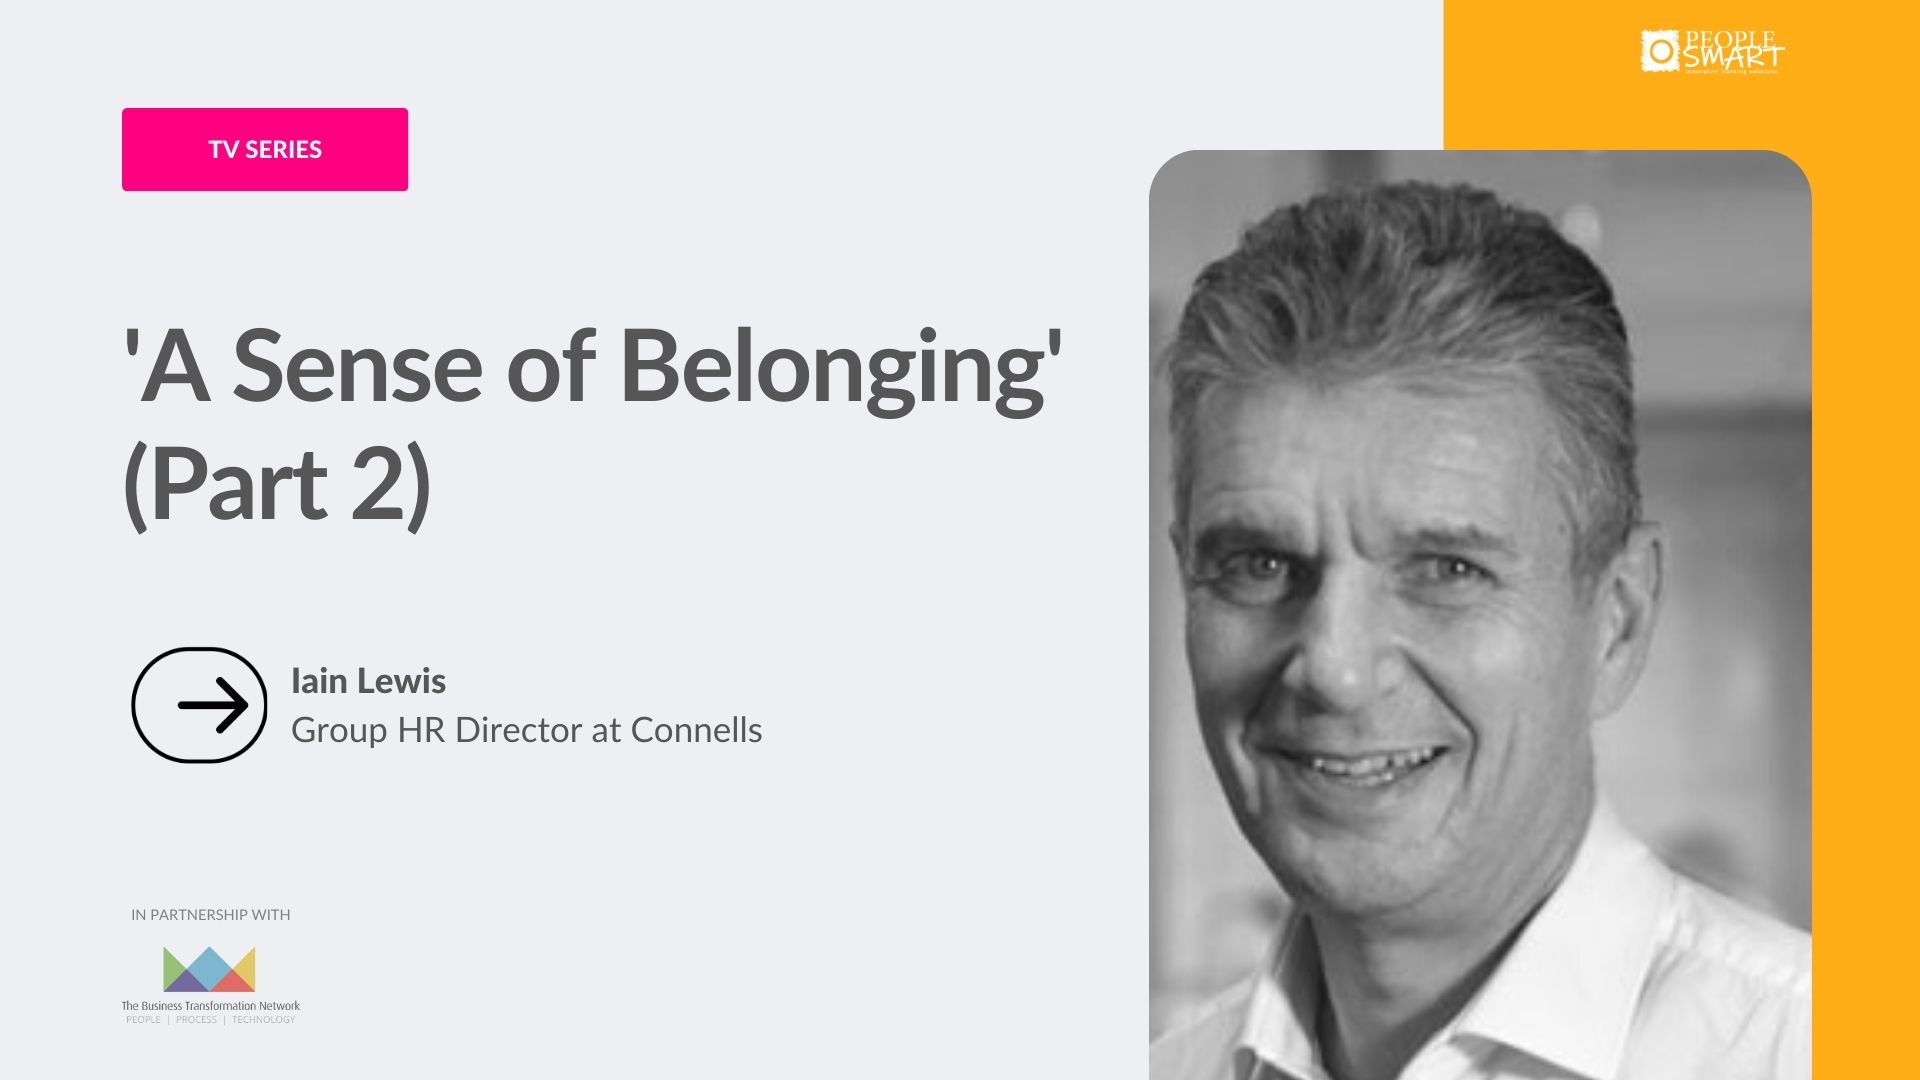 ‘A Sense of Belonging” with Iain Lewis (Part 2)